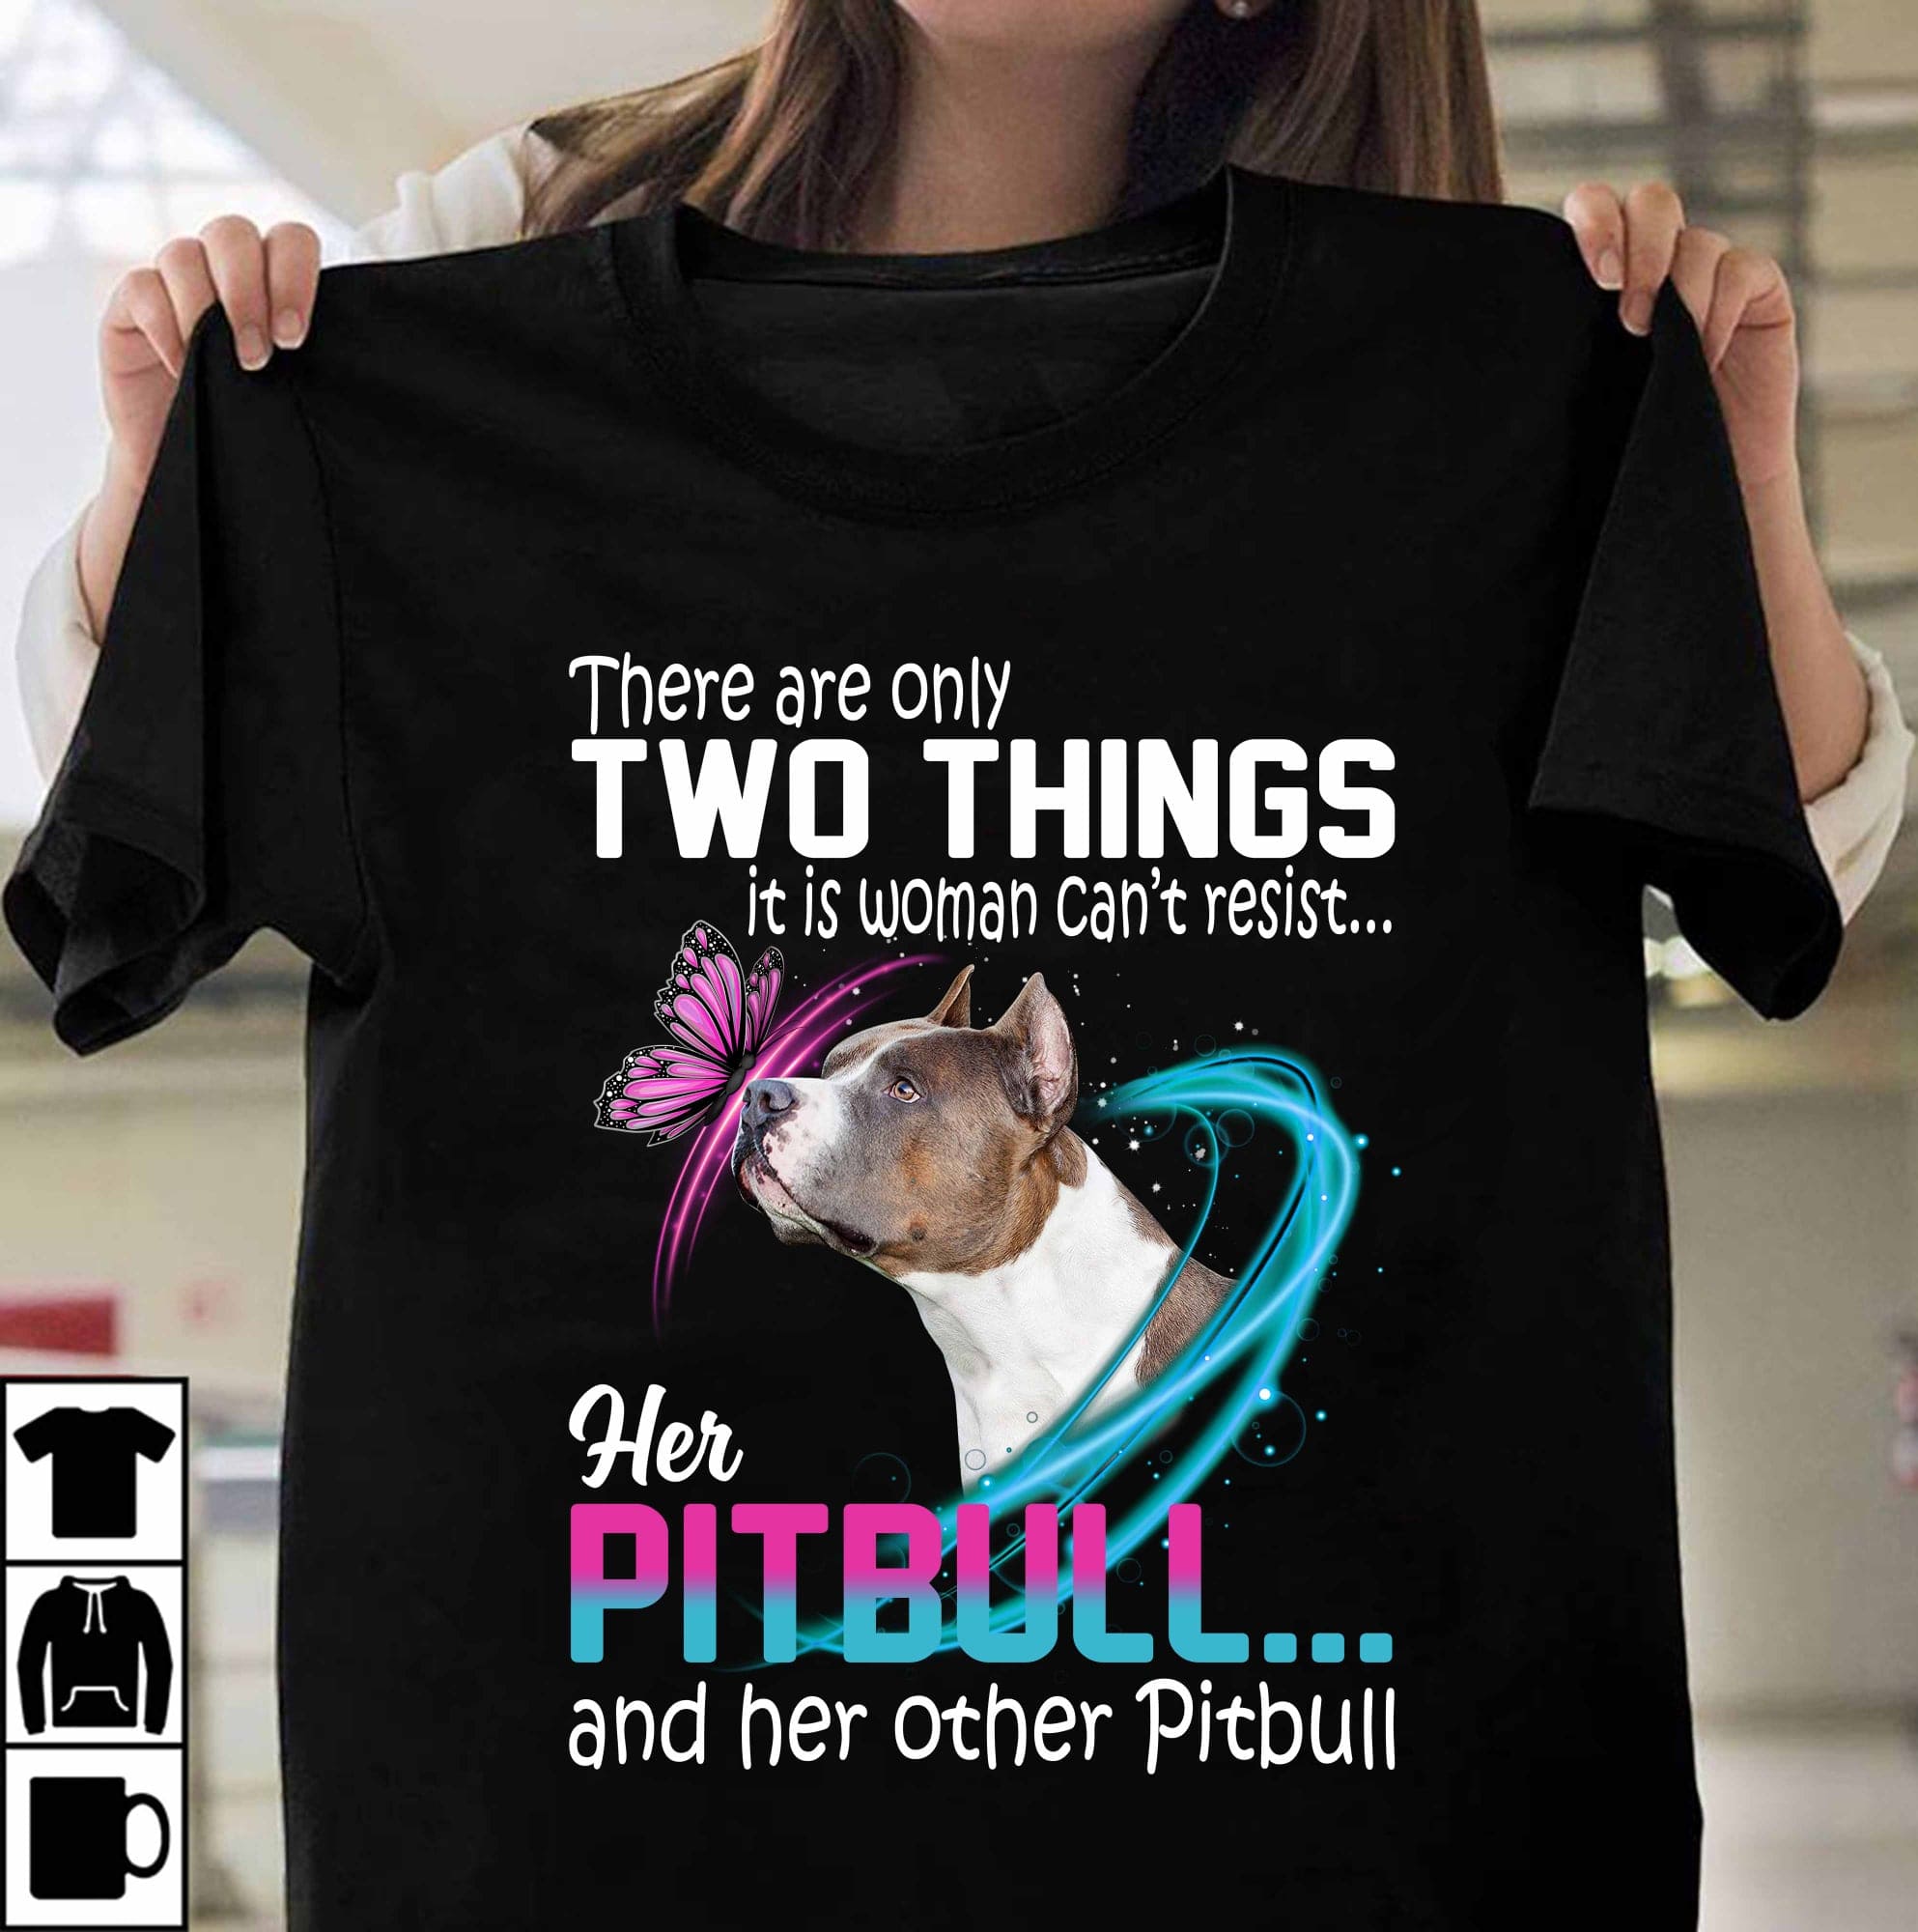 There are only two things it is woman can't resist her pitbull and her other pitbull - Woman loves pitbull